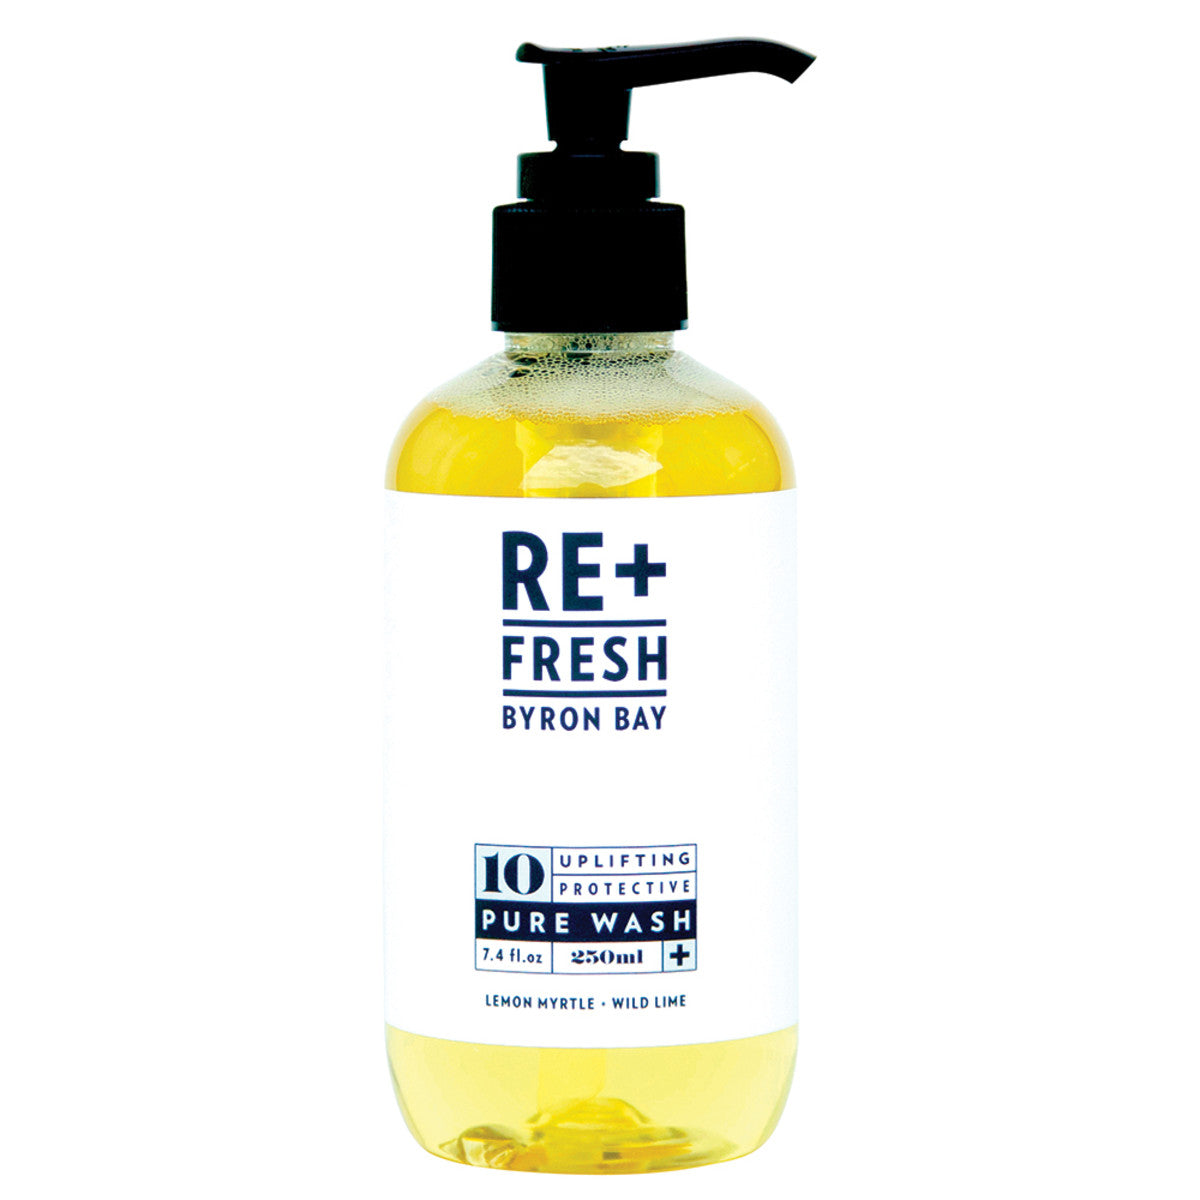 ReFresh Byron Bay Pure Wash Lemon Myrtle and Wild Lime 250ml